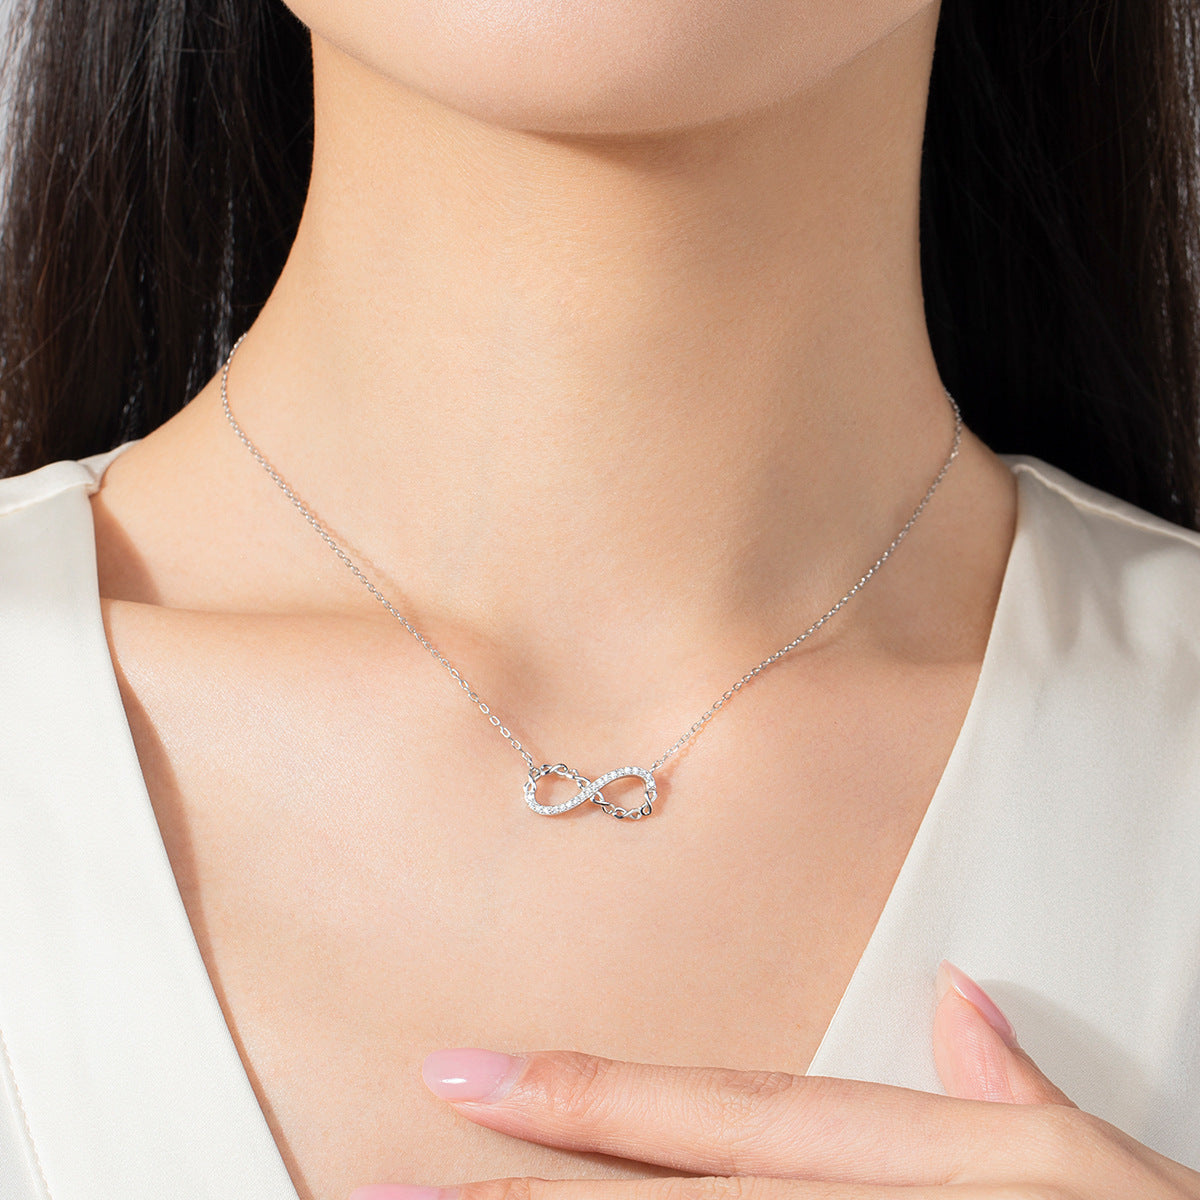 S925 Sterling Silver Mobius Necklace with Female Niche Design - Symbol of Endless Love and Elegance